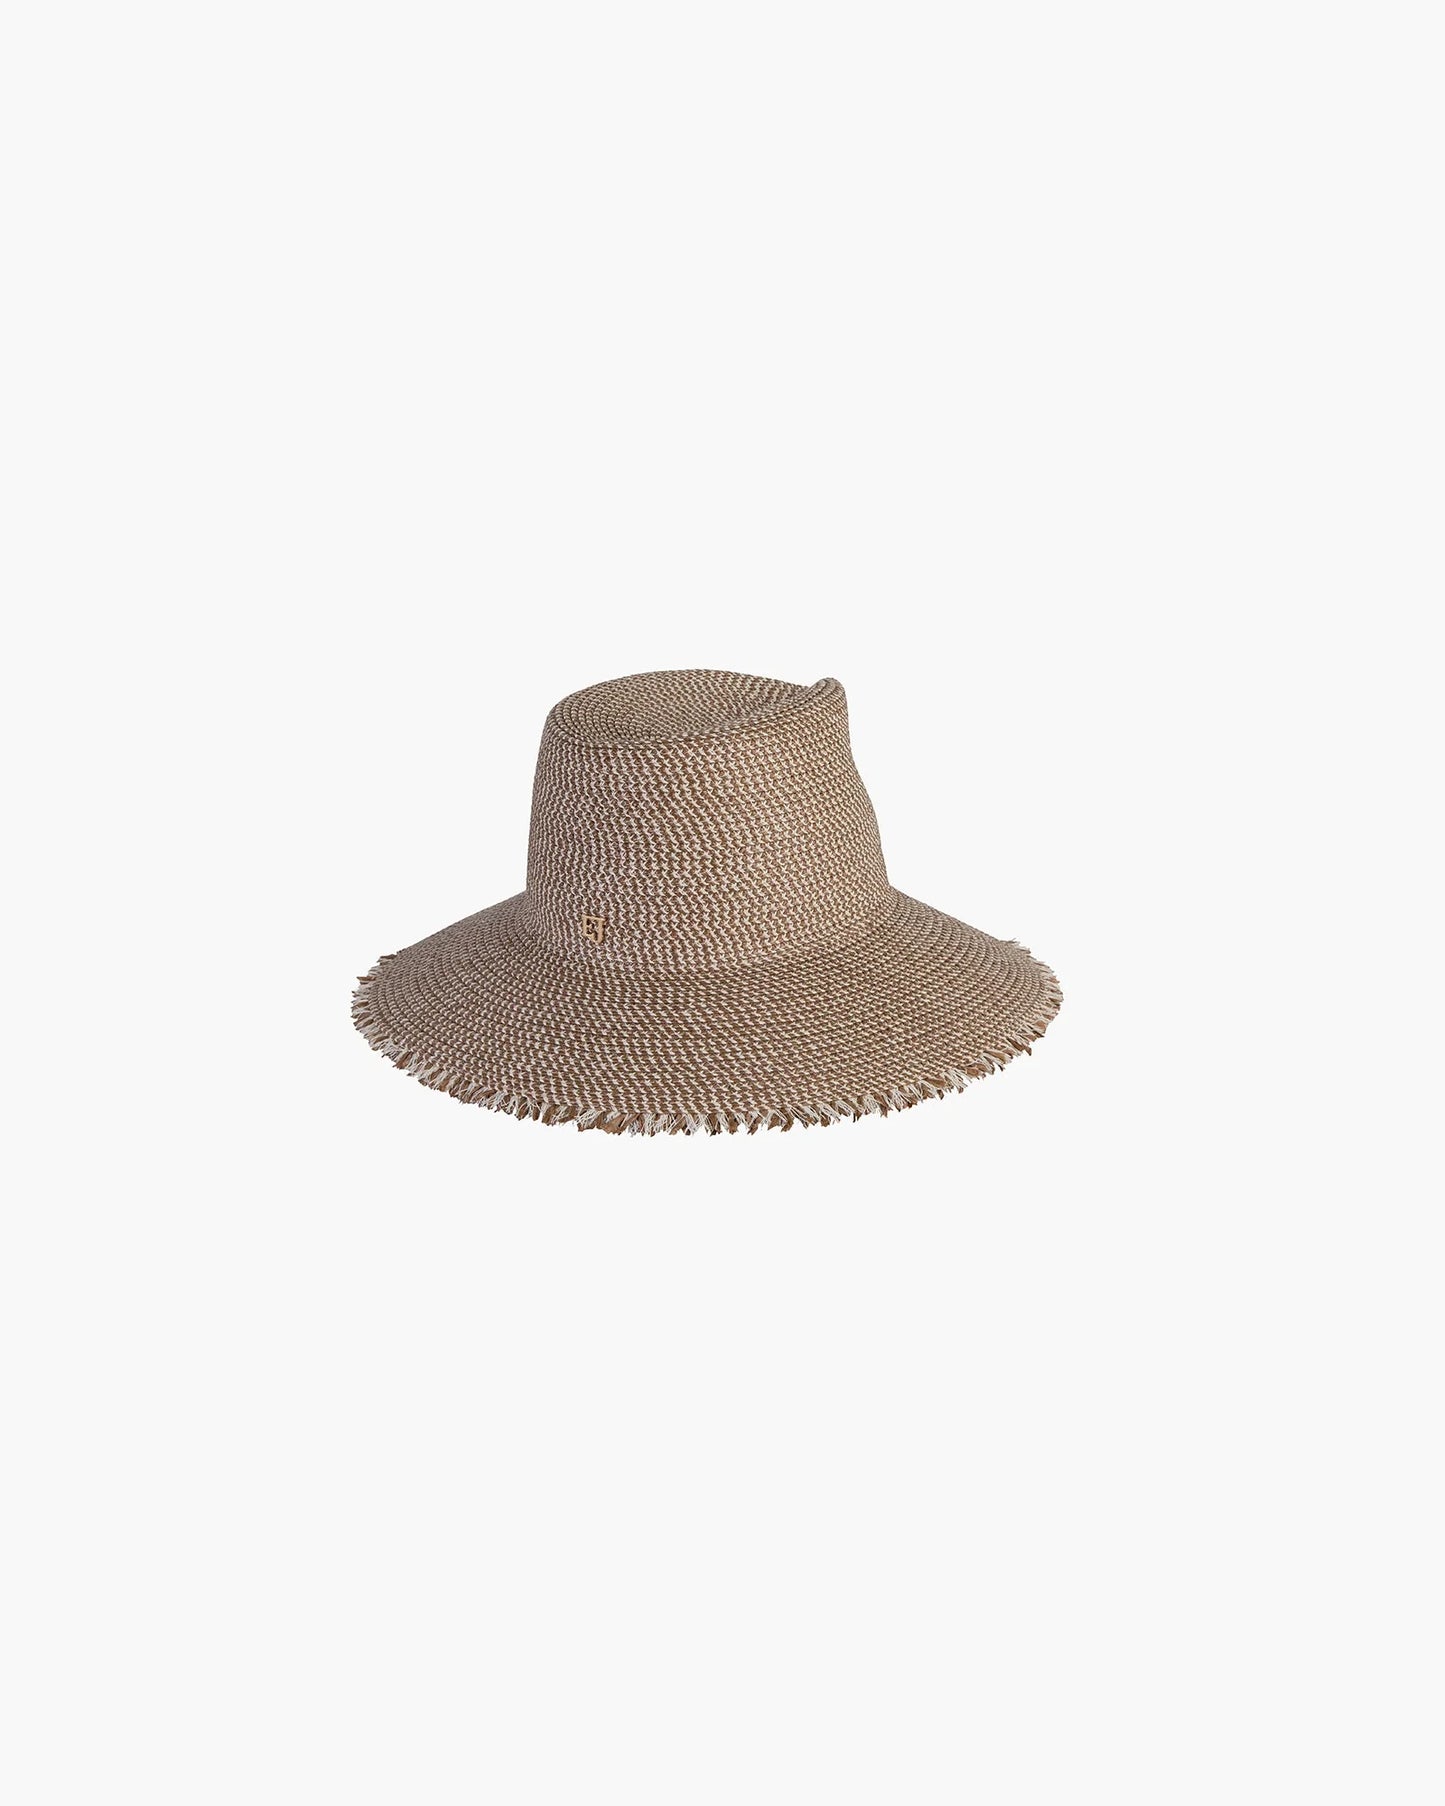 Squishee® a List - Packable Fedora Hat